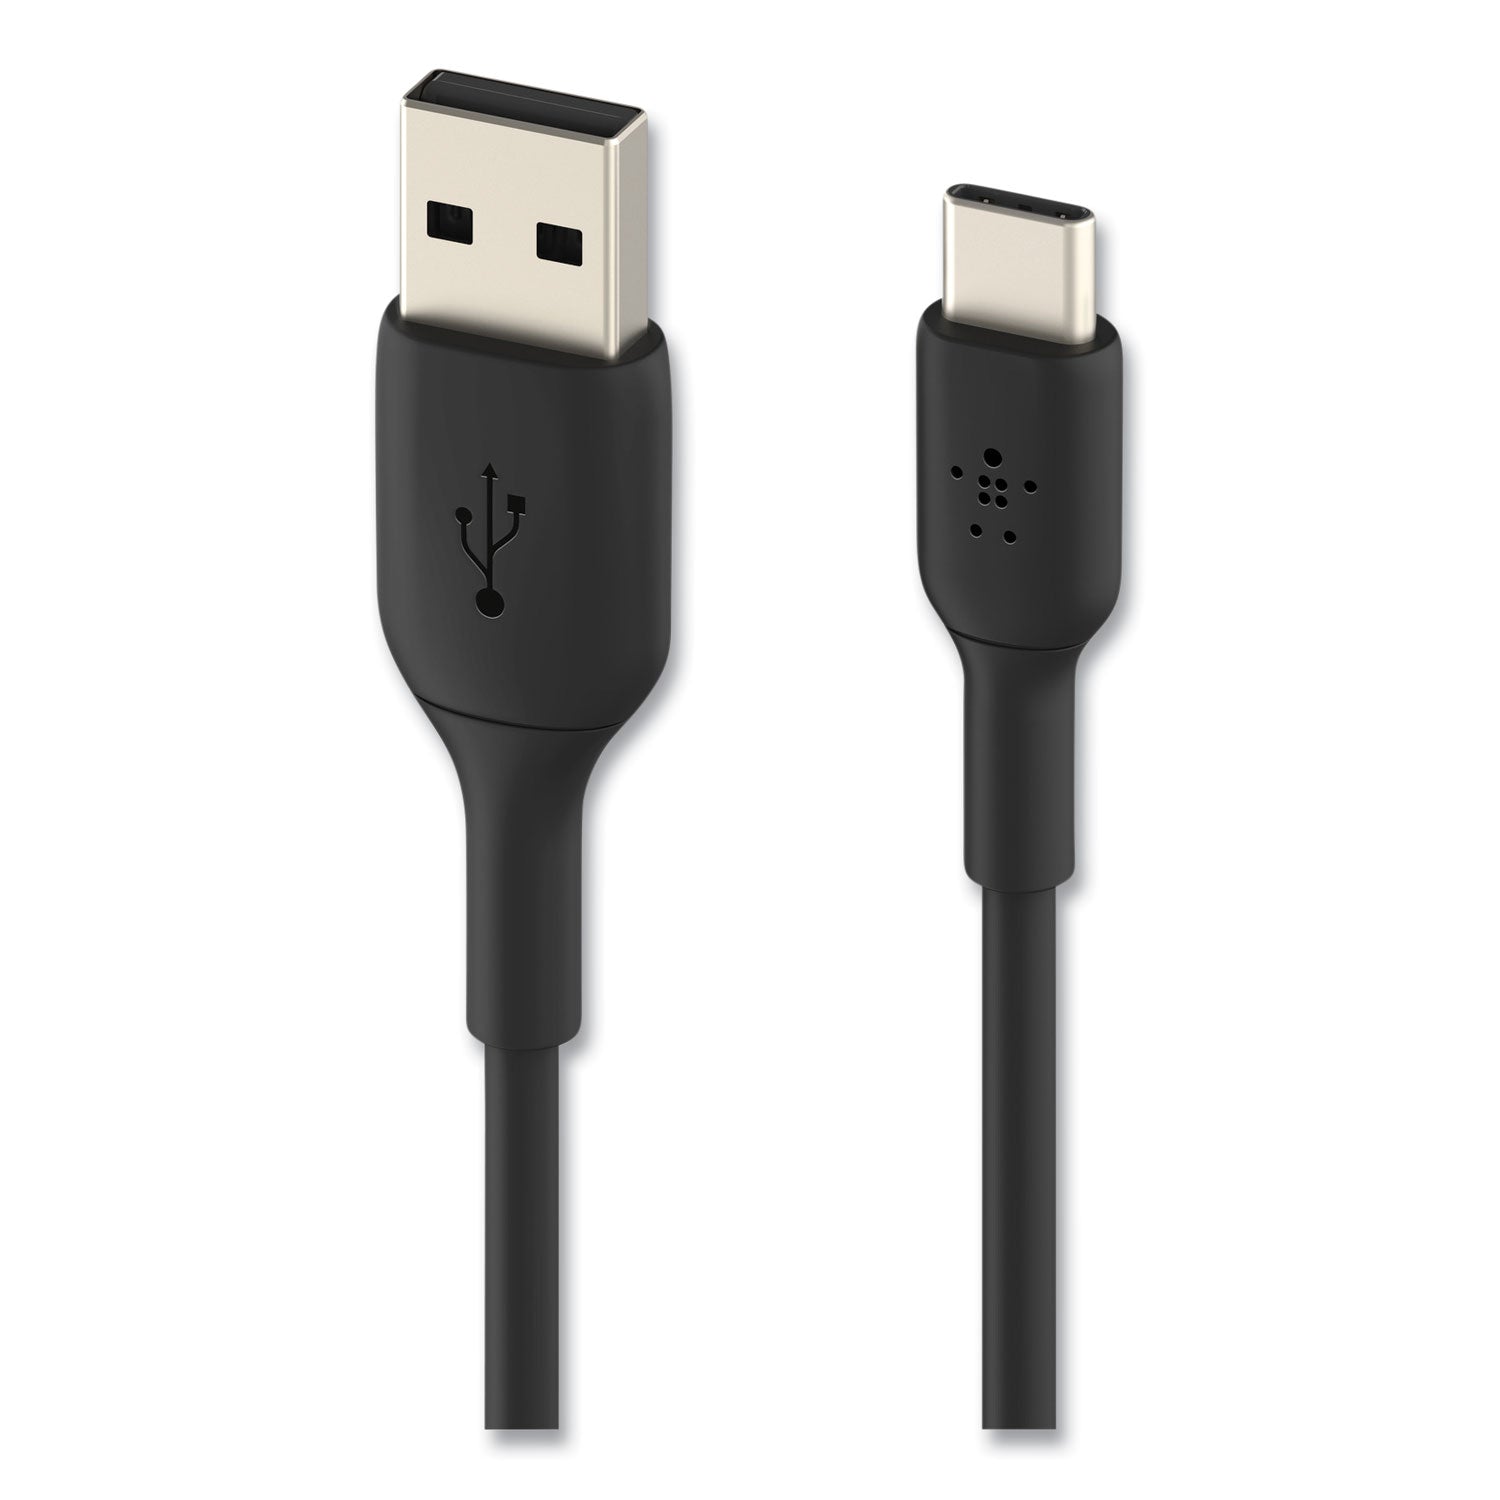 boost-charge-usb-c-to-usb-a-chargesync-cable-33-ft-black_blkcab001bt1mbk - 2